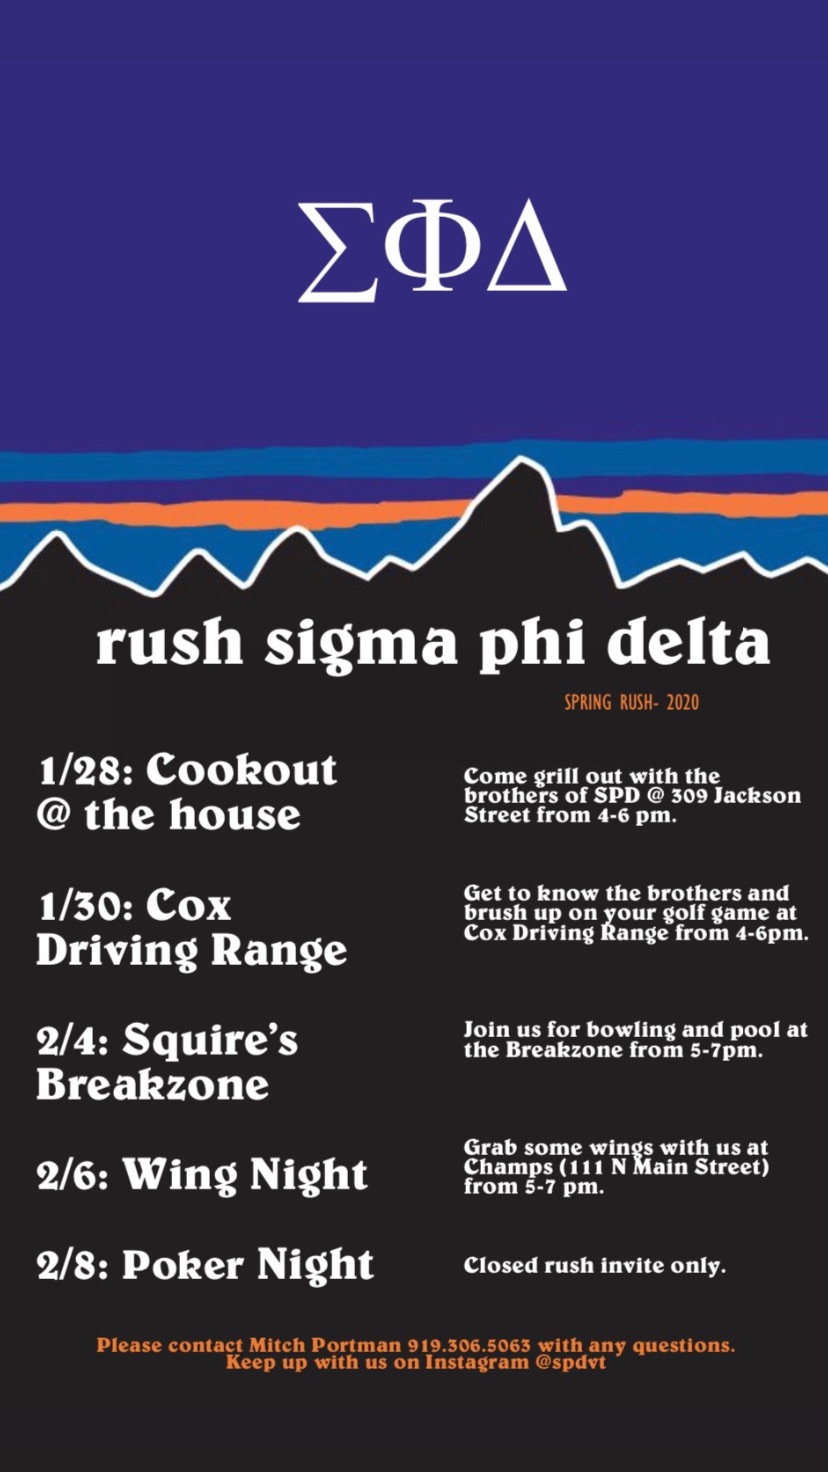 Recruitment Schedule and Contact - Interfraternity Council ...